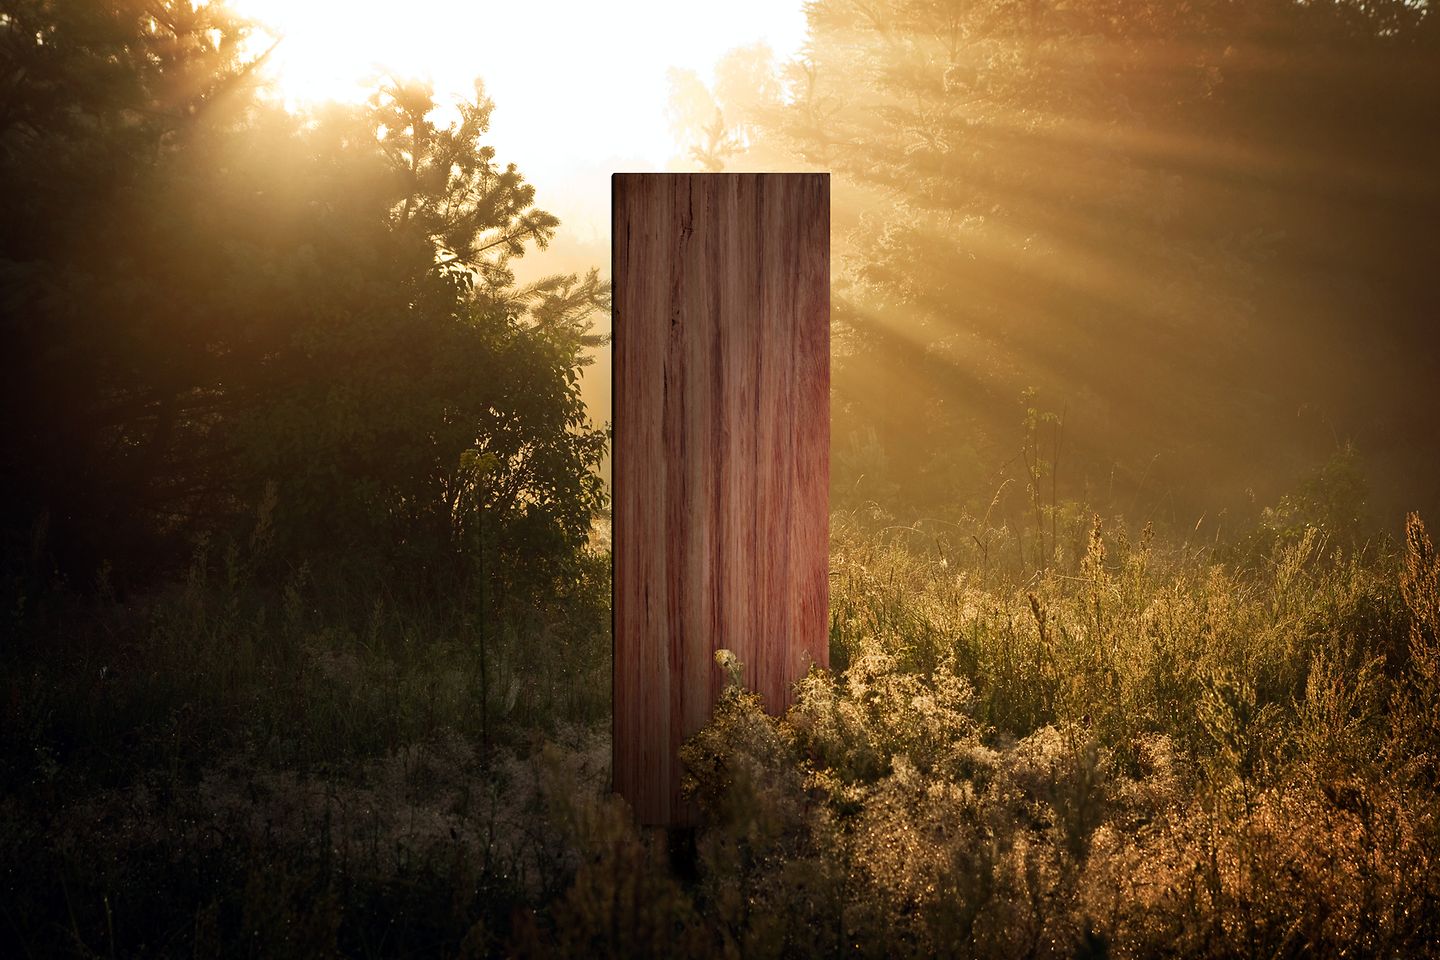 A wooden board in a forest environment is illuminated